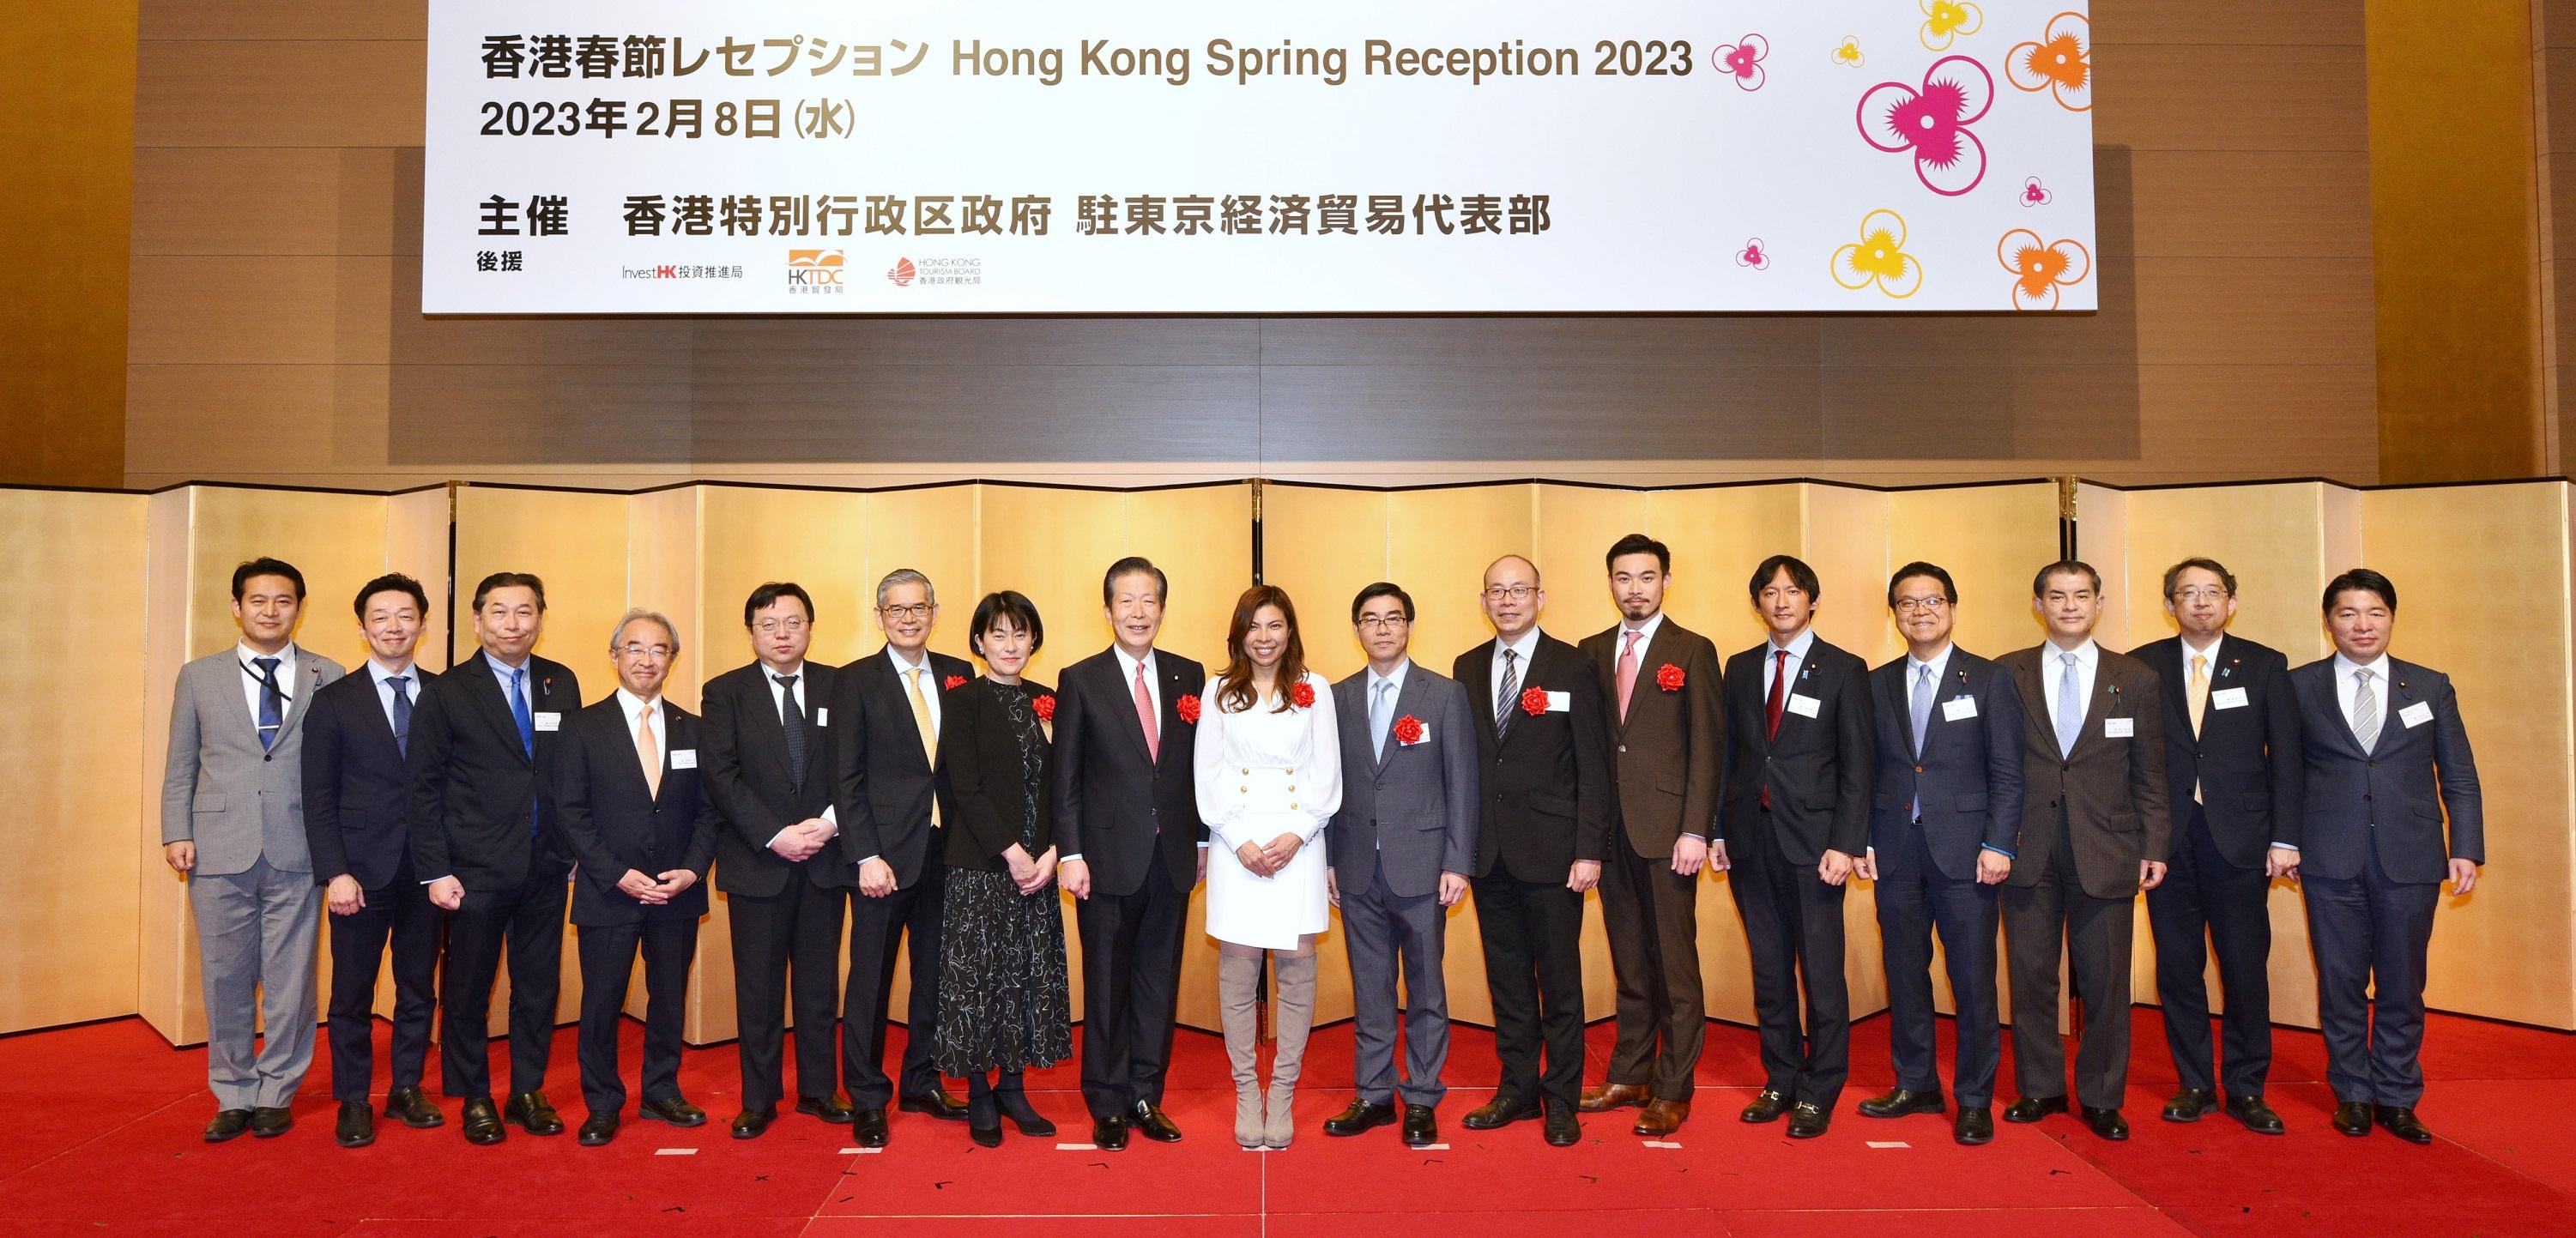 The Acting Principal Hong Kong Economic and Trade Representative (Tokyo), Miss Winsome Au (centre); the Minister of the Embassy of the People's Republic of China in Japan, Mr Shi Yong (eighth right); Japan National Diet Members and other guests are pictured at the spring reception held by the Hong Kong Economic and Trade Office (Tokyo) today (February 8).